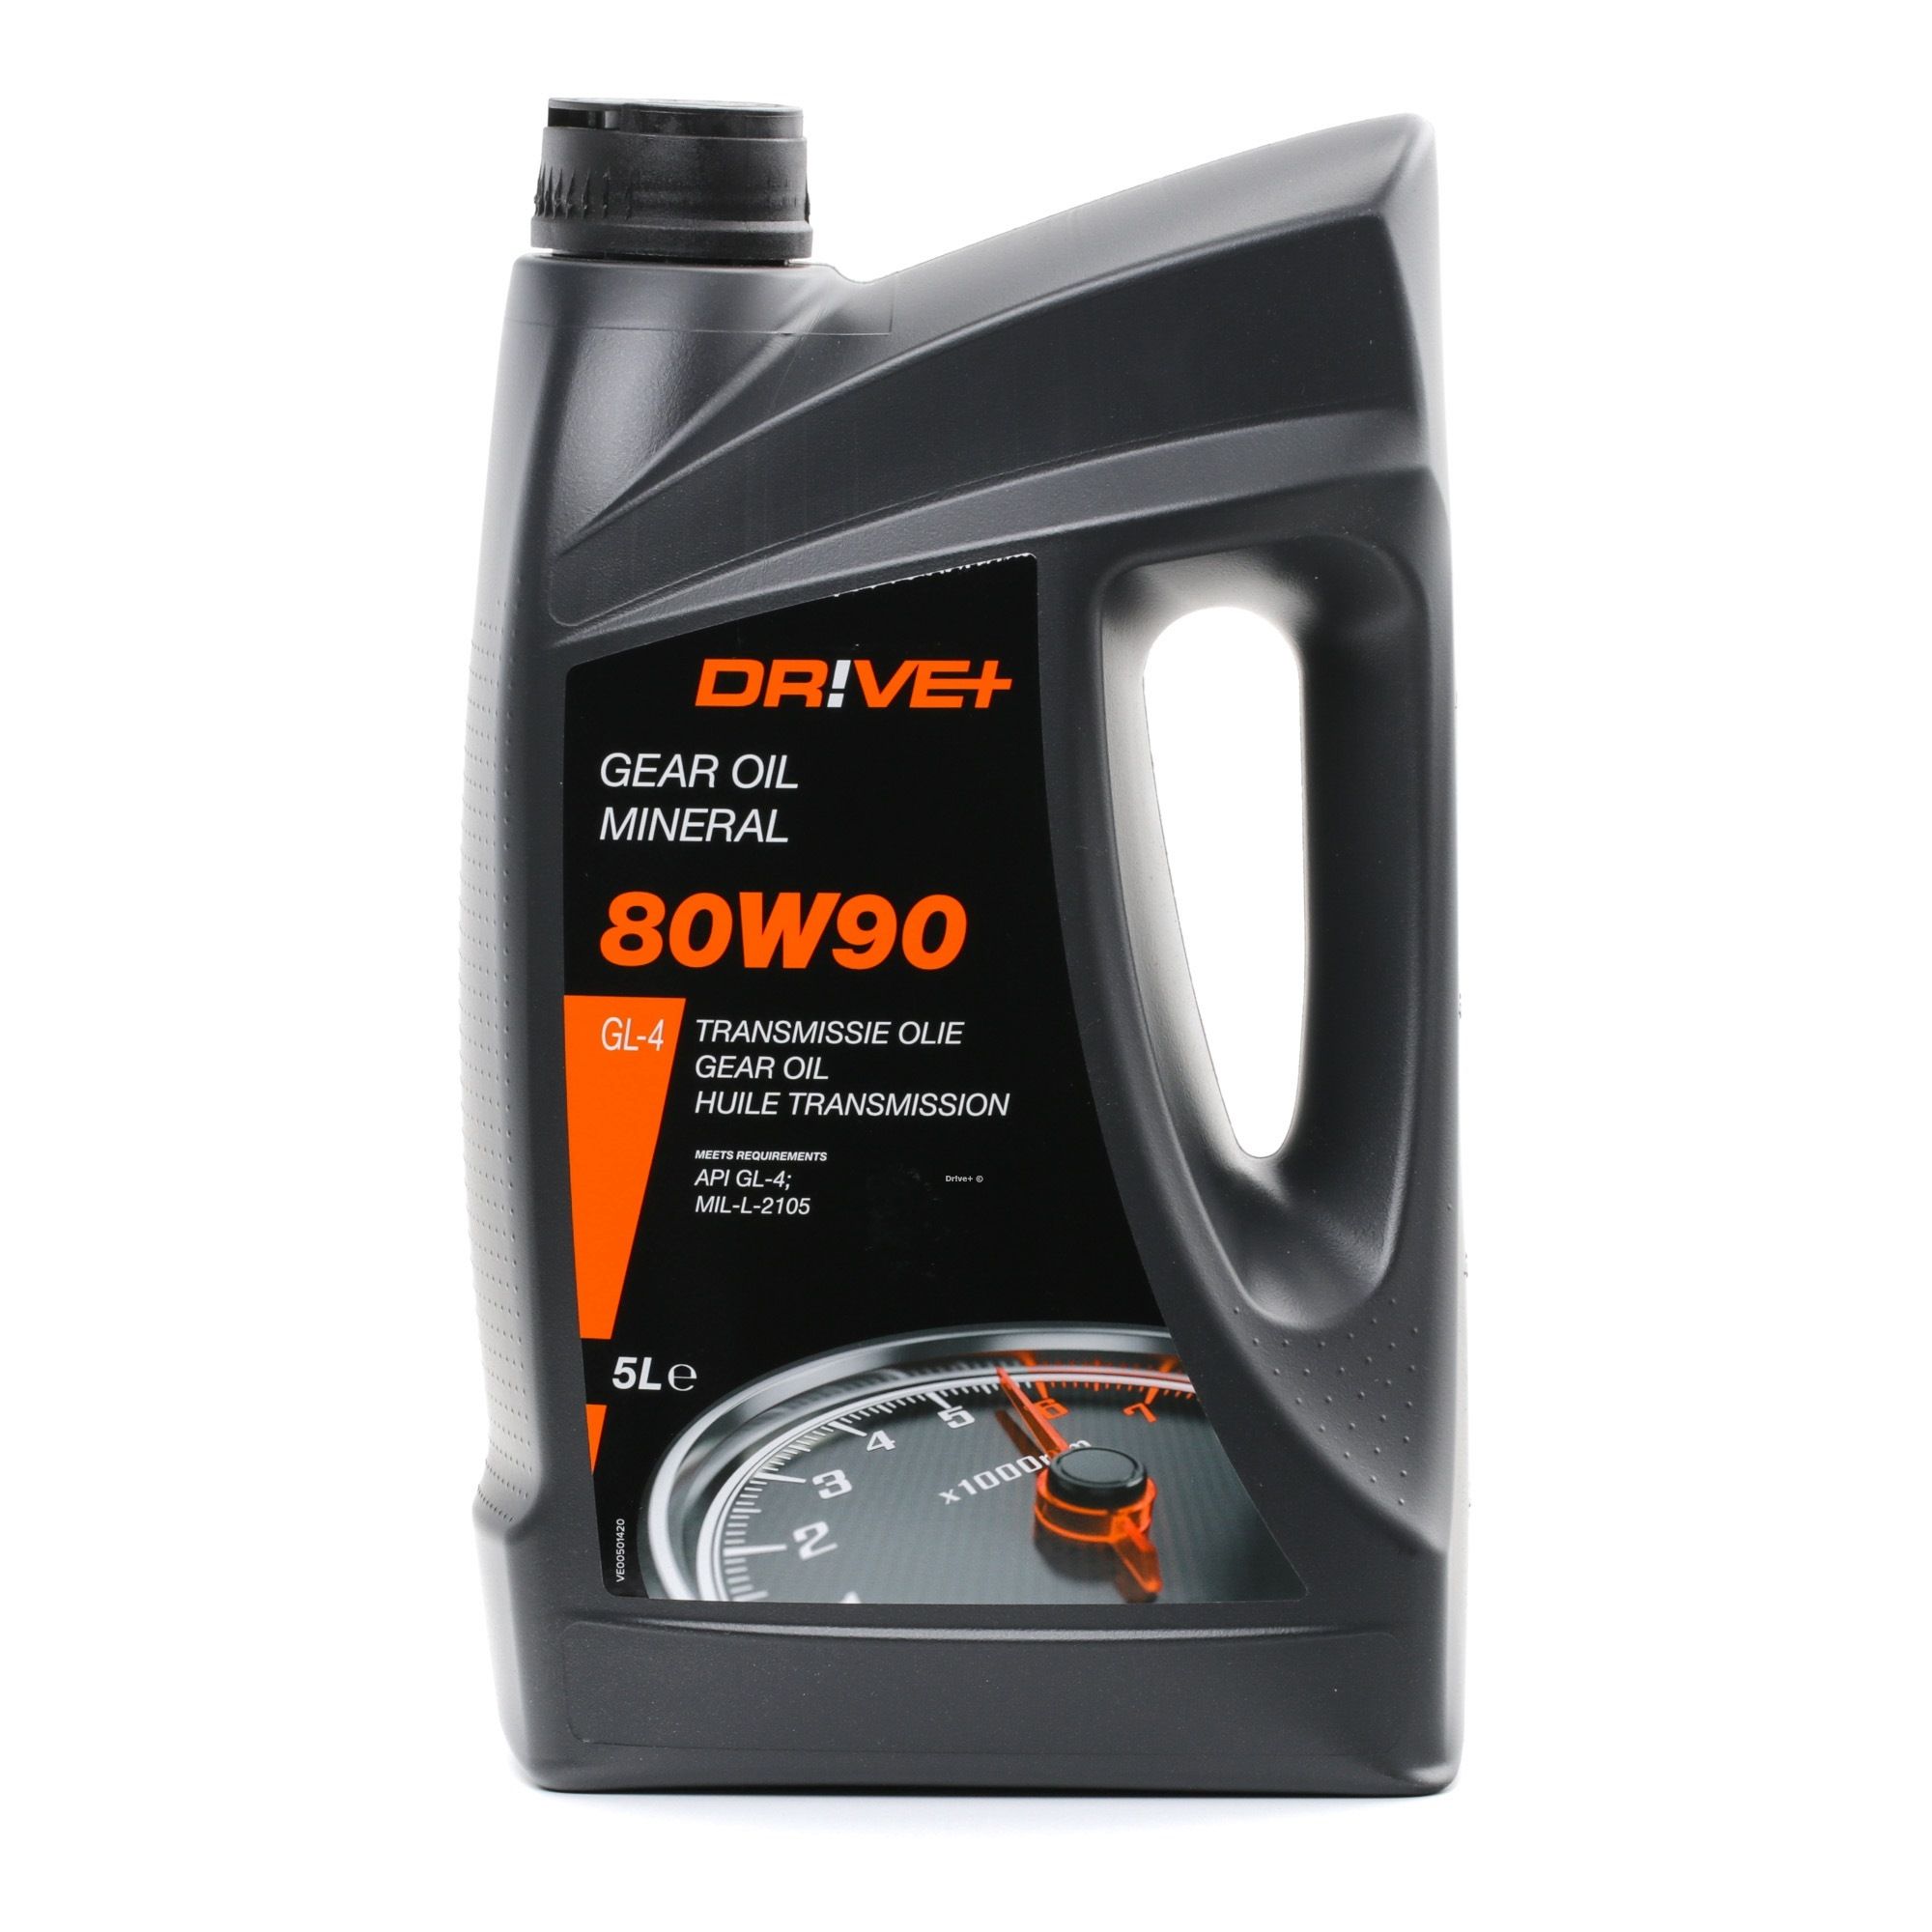 DP3310.10.068 Dr!ve+ Gearbox oil MAZDA 80W-90, Capacity: 5l, Contains mineral oil